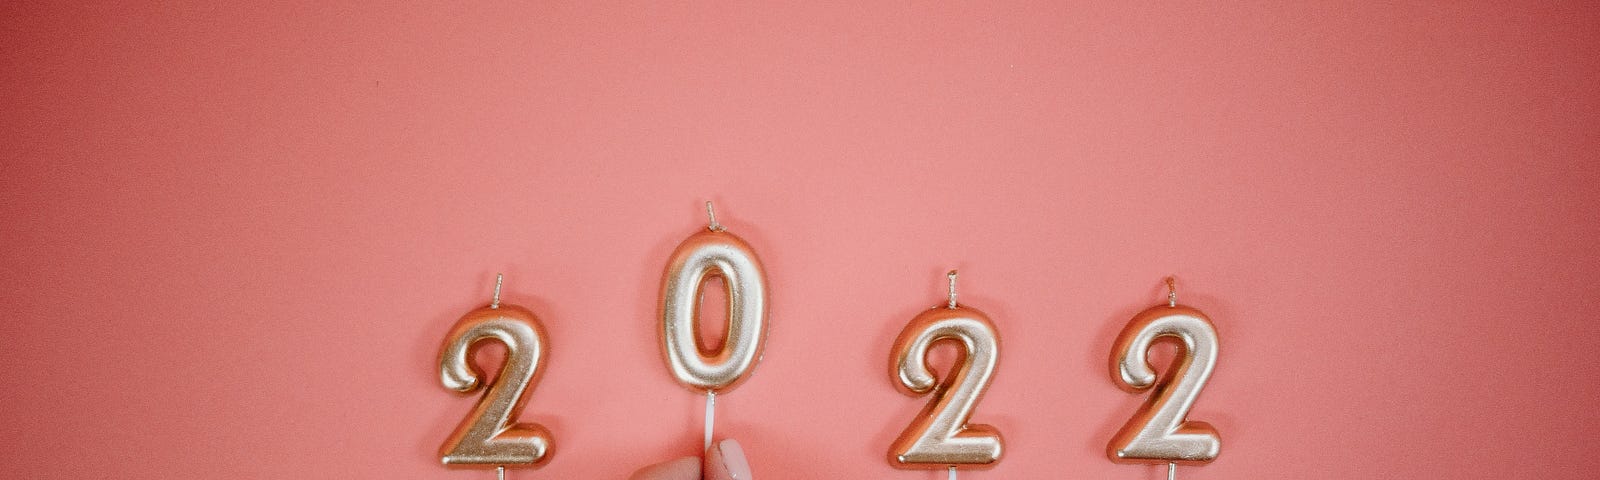 A white hand puts gold candles spelling out “2022” on a pink background.